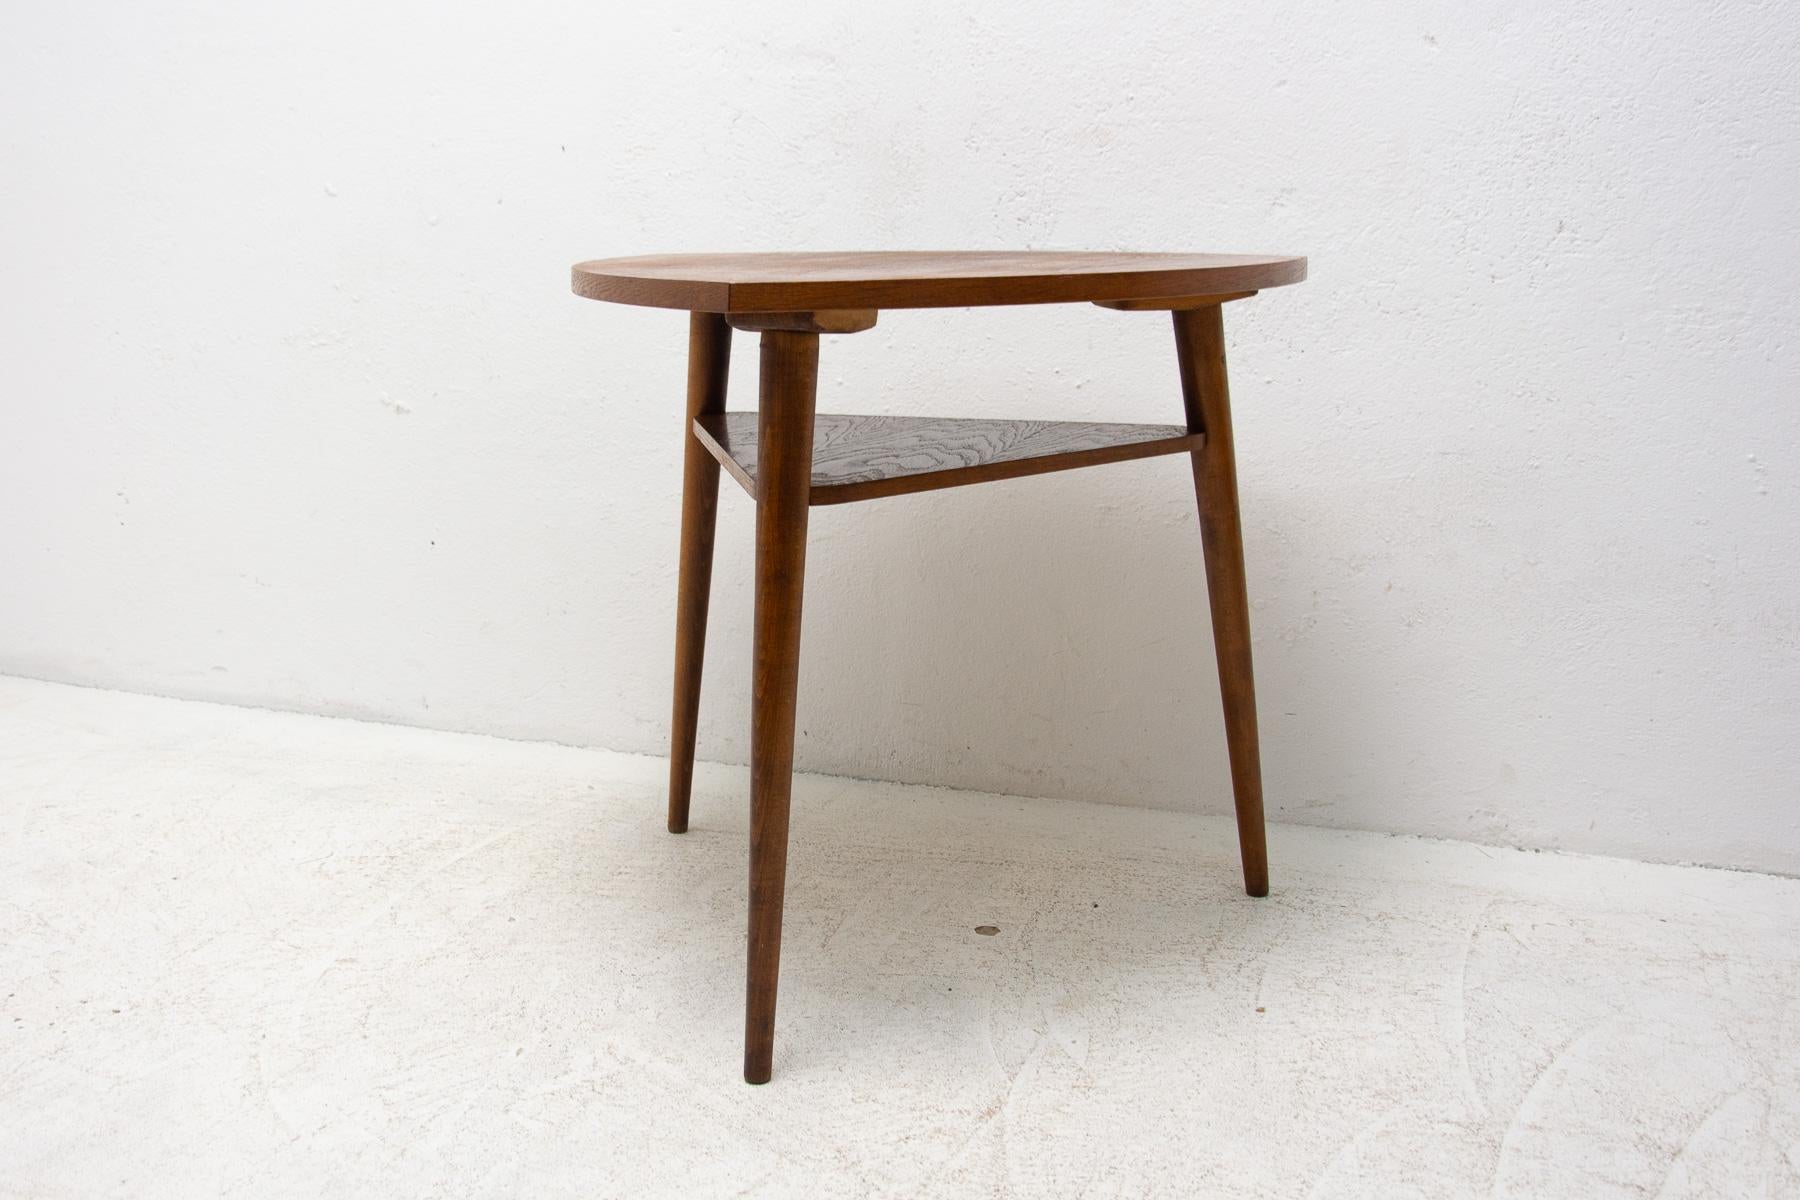 This mid-century coffee table was made in the former Czechoslovakia in the 1960's. It's made of oak wood.

Associated with world-renowned EXPO 58 exhibition in Brussels. In good Vintage condition, showing signs of age and use.

Measures: height